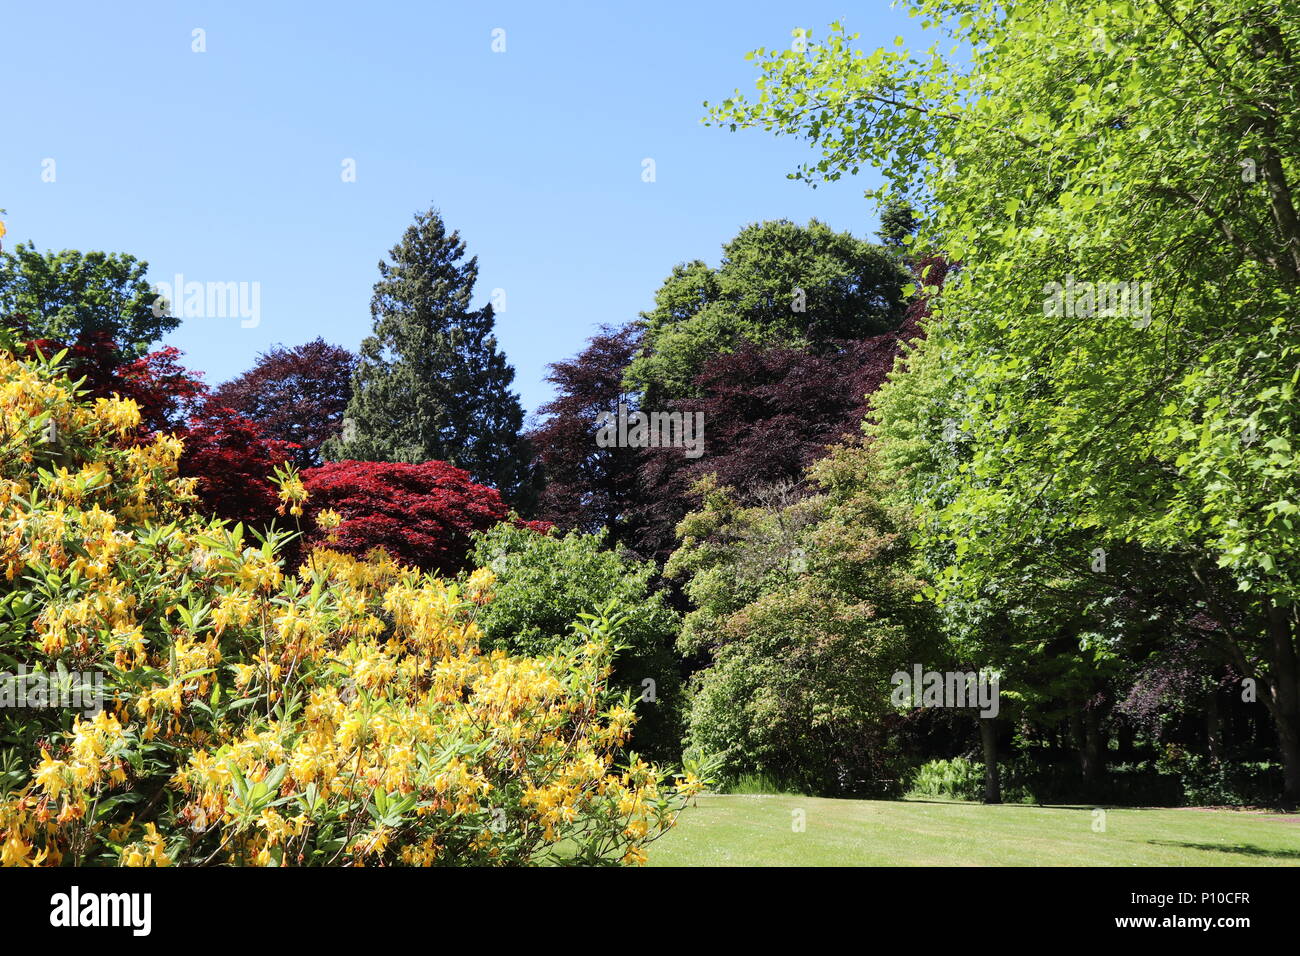 Flowers, plants and shrubs in formal garden against blue sky Stock Photo